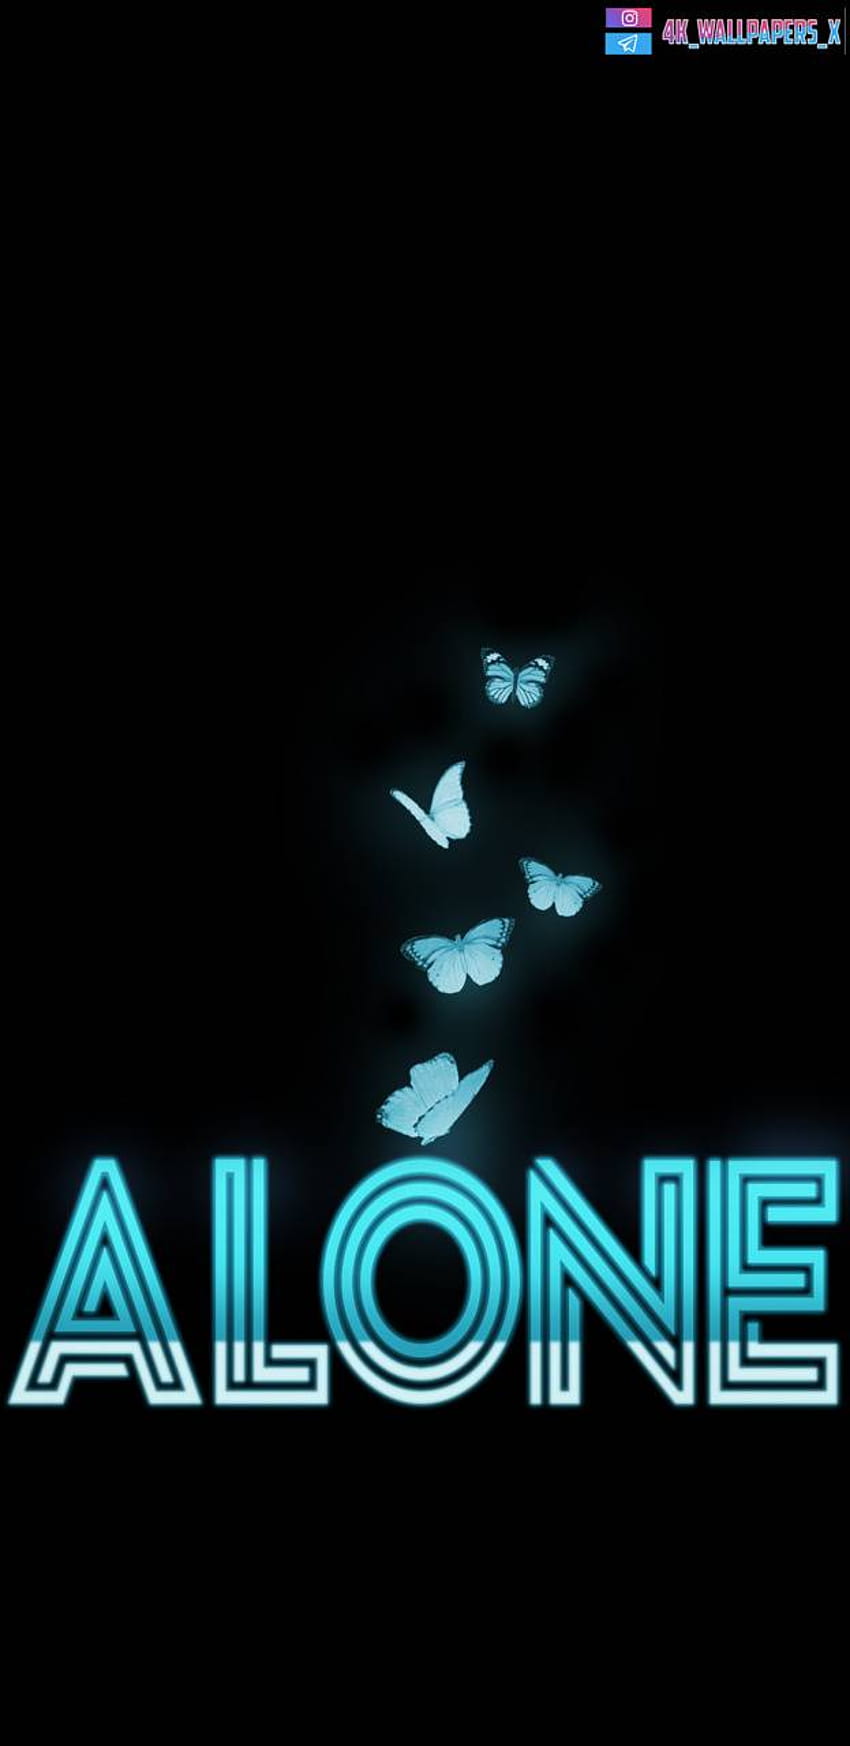 Backgrounds Alone, alone text HD phone wallpaper | Pxfuel